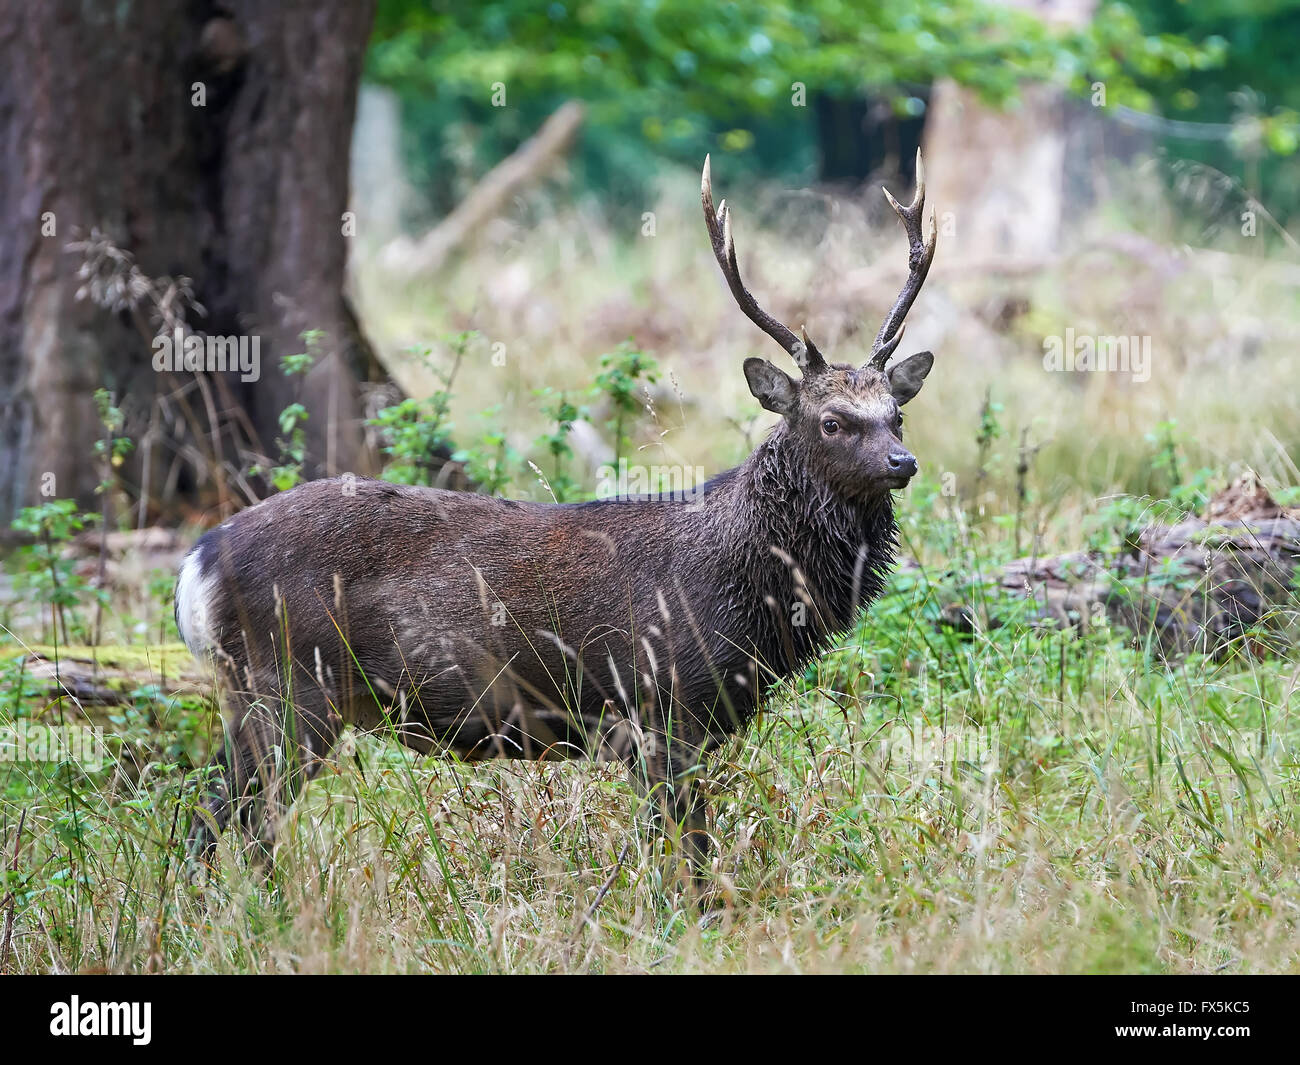 Sika Deer hiding in the high grass in its natural habitat Stock Photo